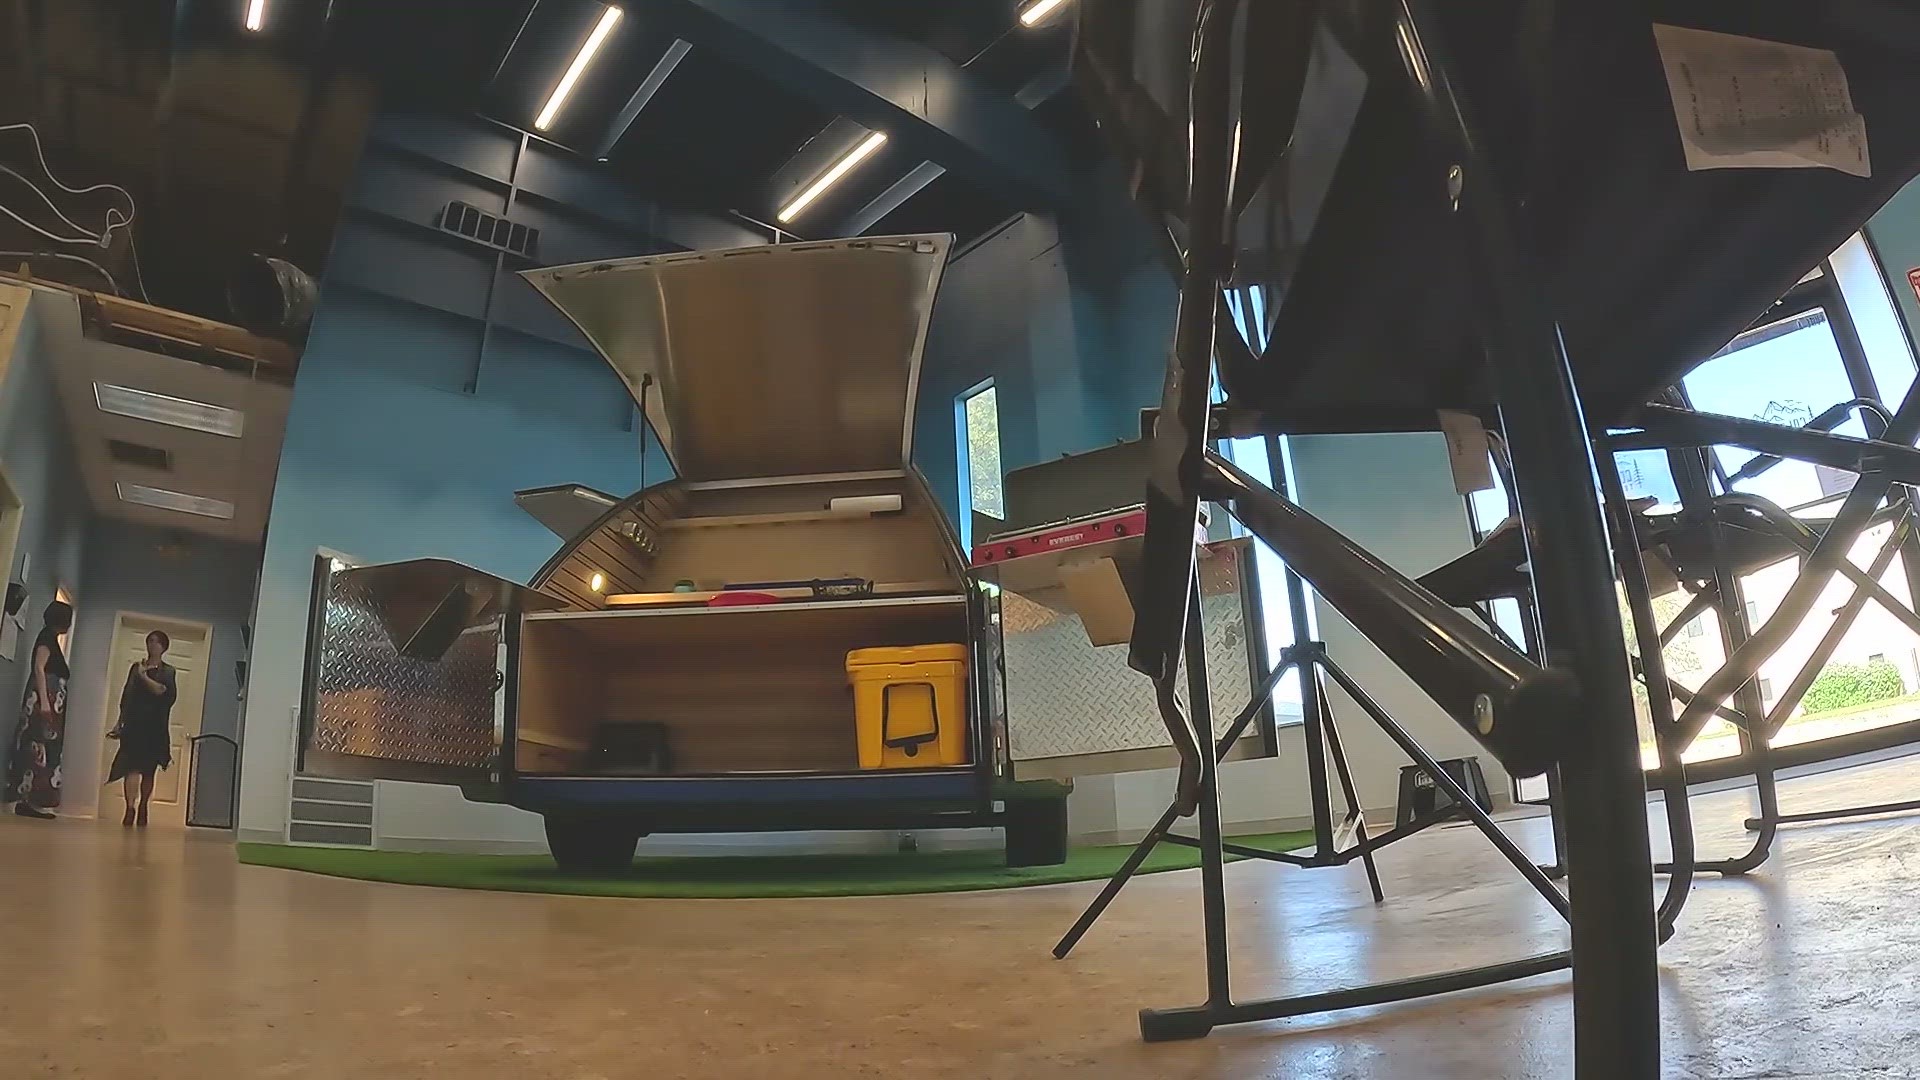 Colorado Teardrops has created camper trailers with batteries that can add range back to your electric car, charge your camper or even power a house in an emergency.